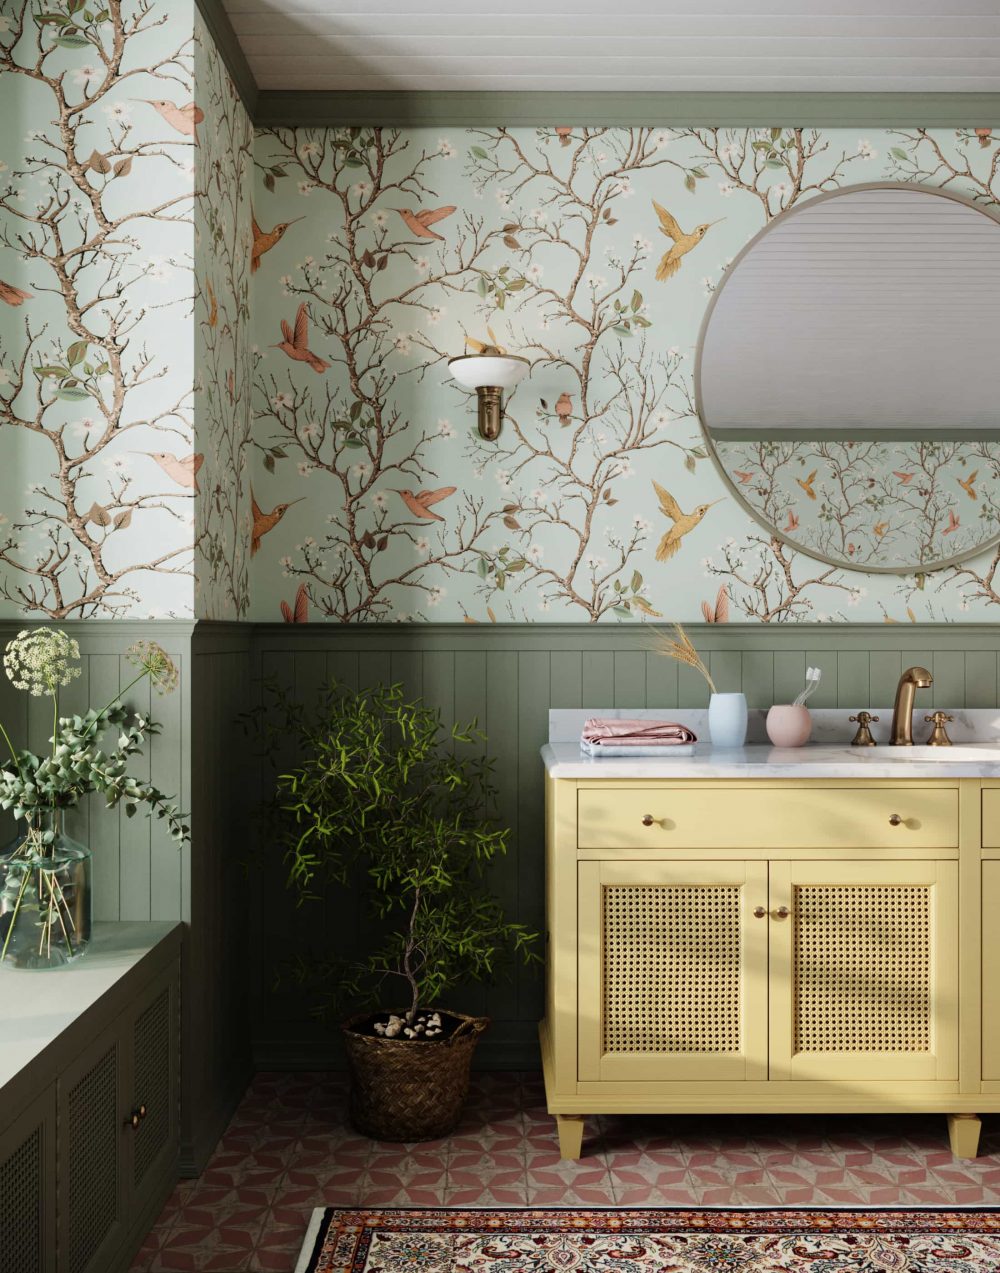 Bobbi Beck: The Eco-Friendly Wallpaper Everyone Needs to Know About